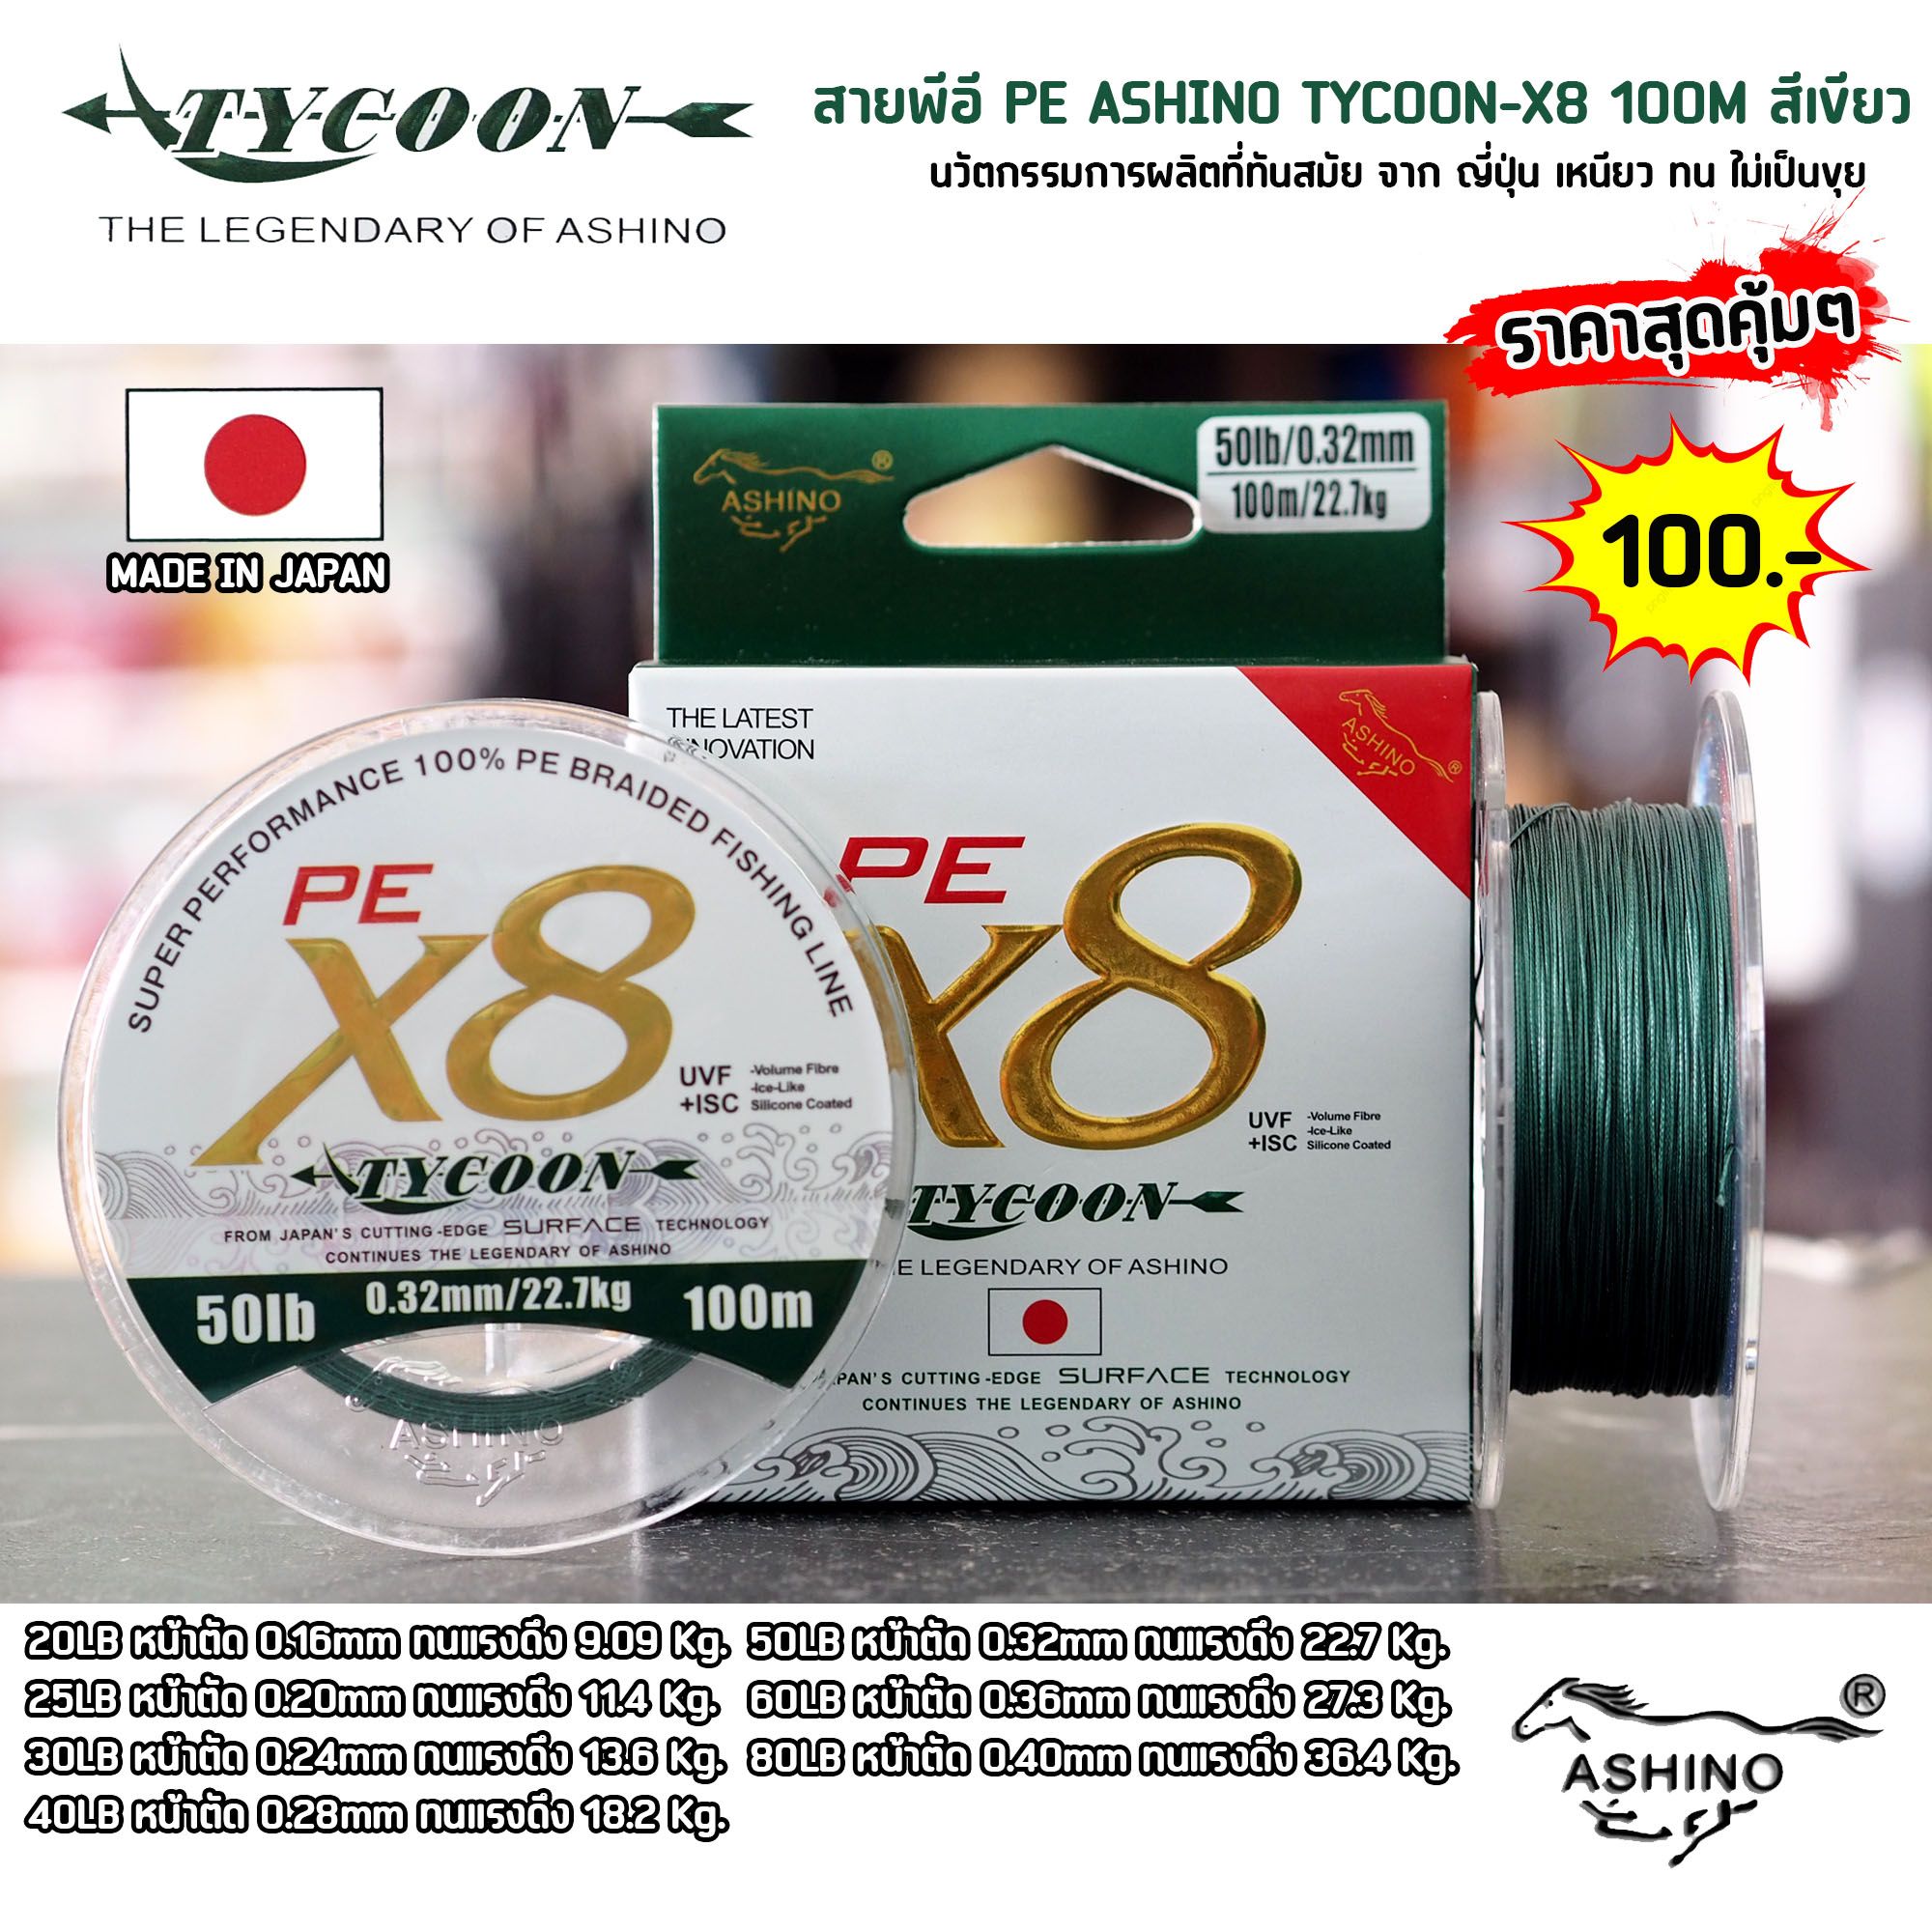 All-Products - ซื้อ All-Products ราคาดีที่สุดค่ะ Thailand